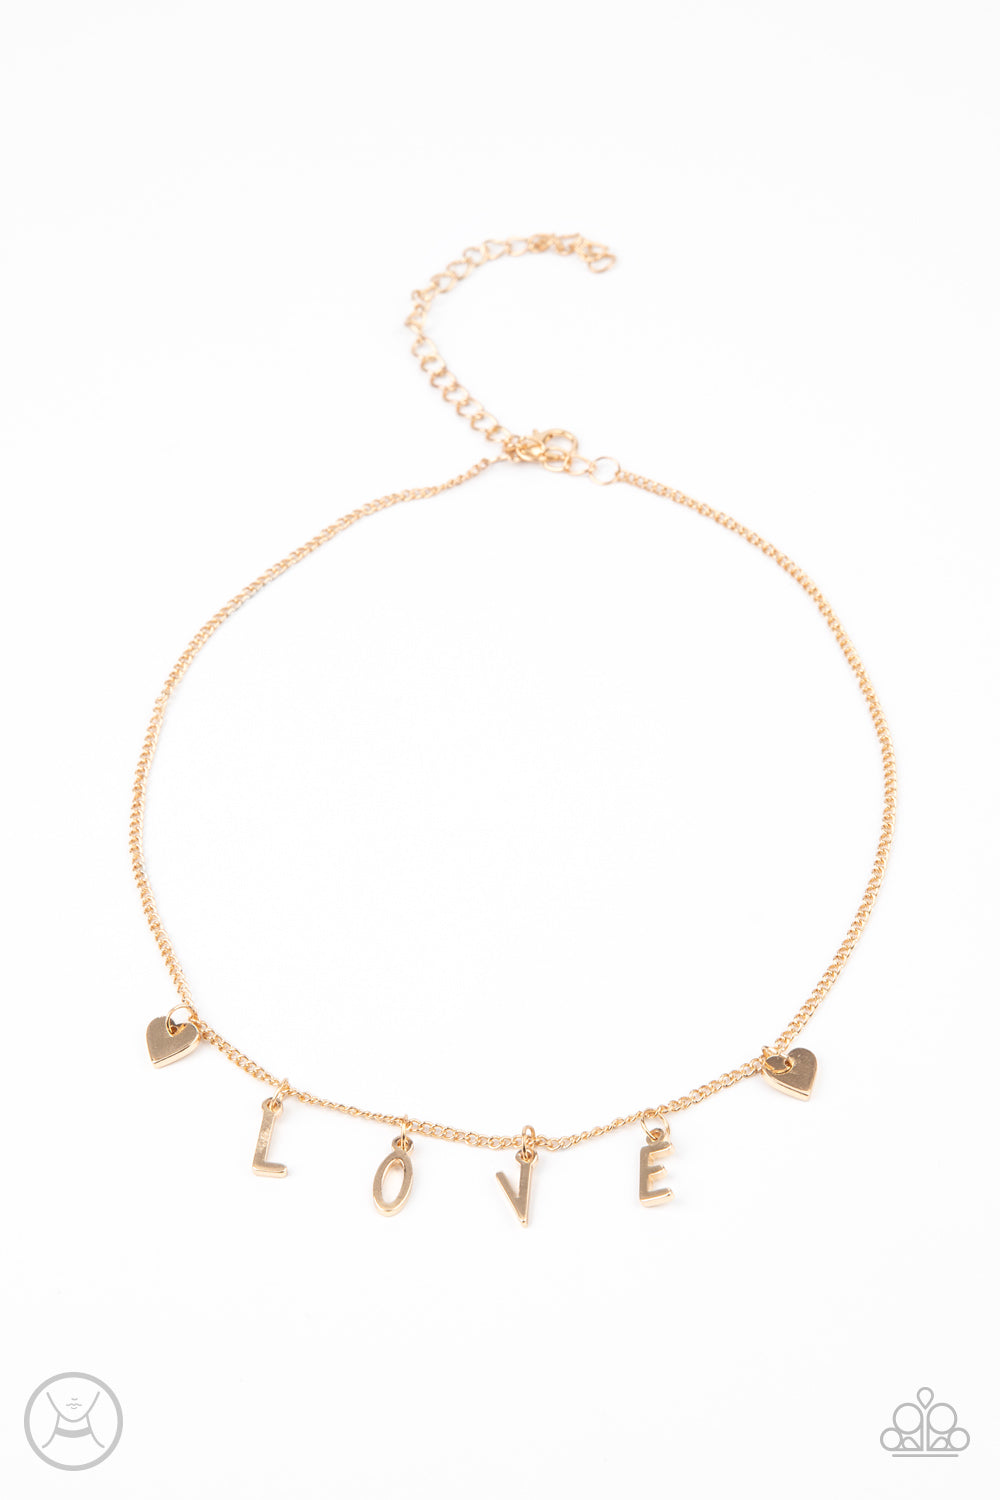 LOVE CONQUERS ALL - GOLD LETTERS NECKLACE